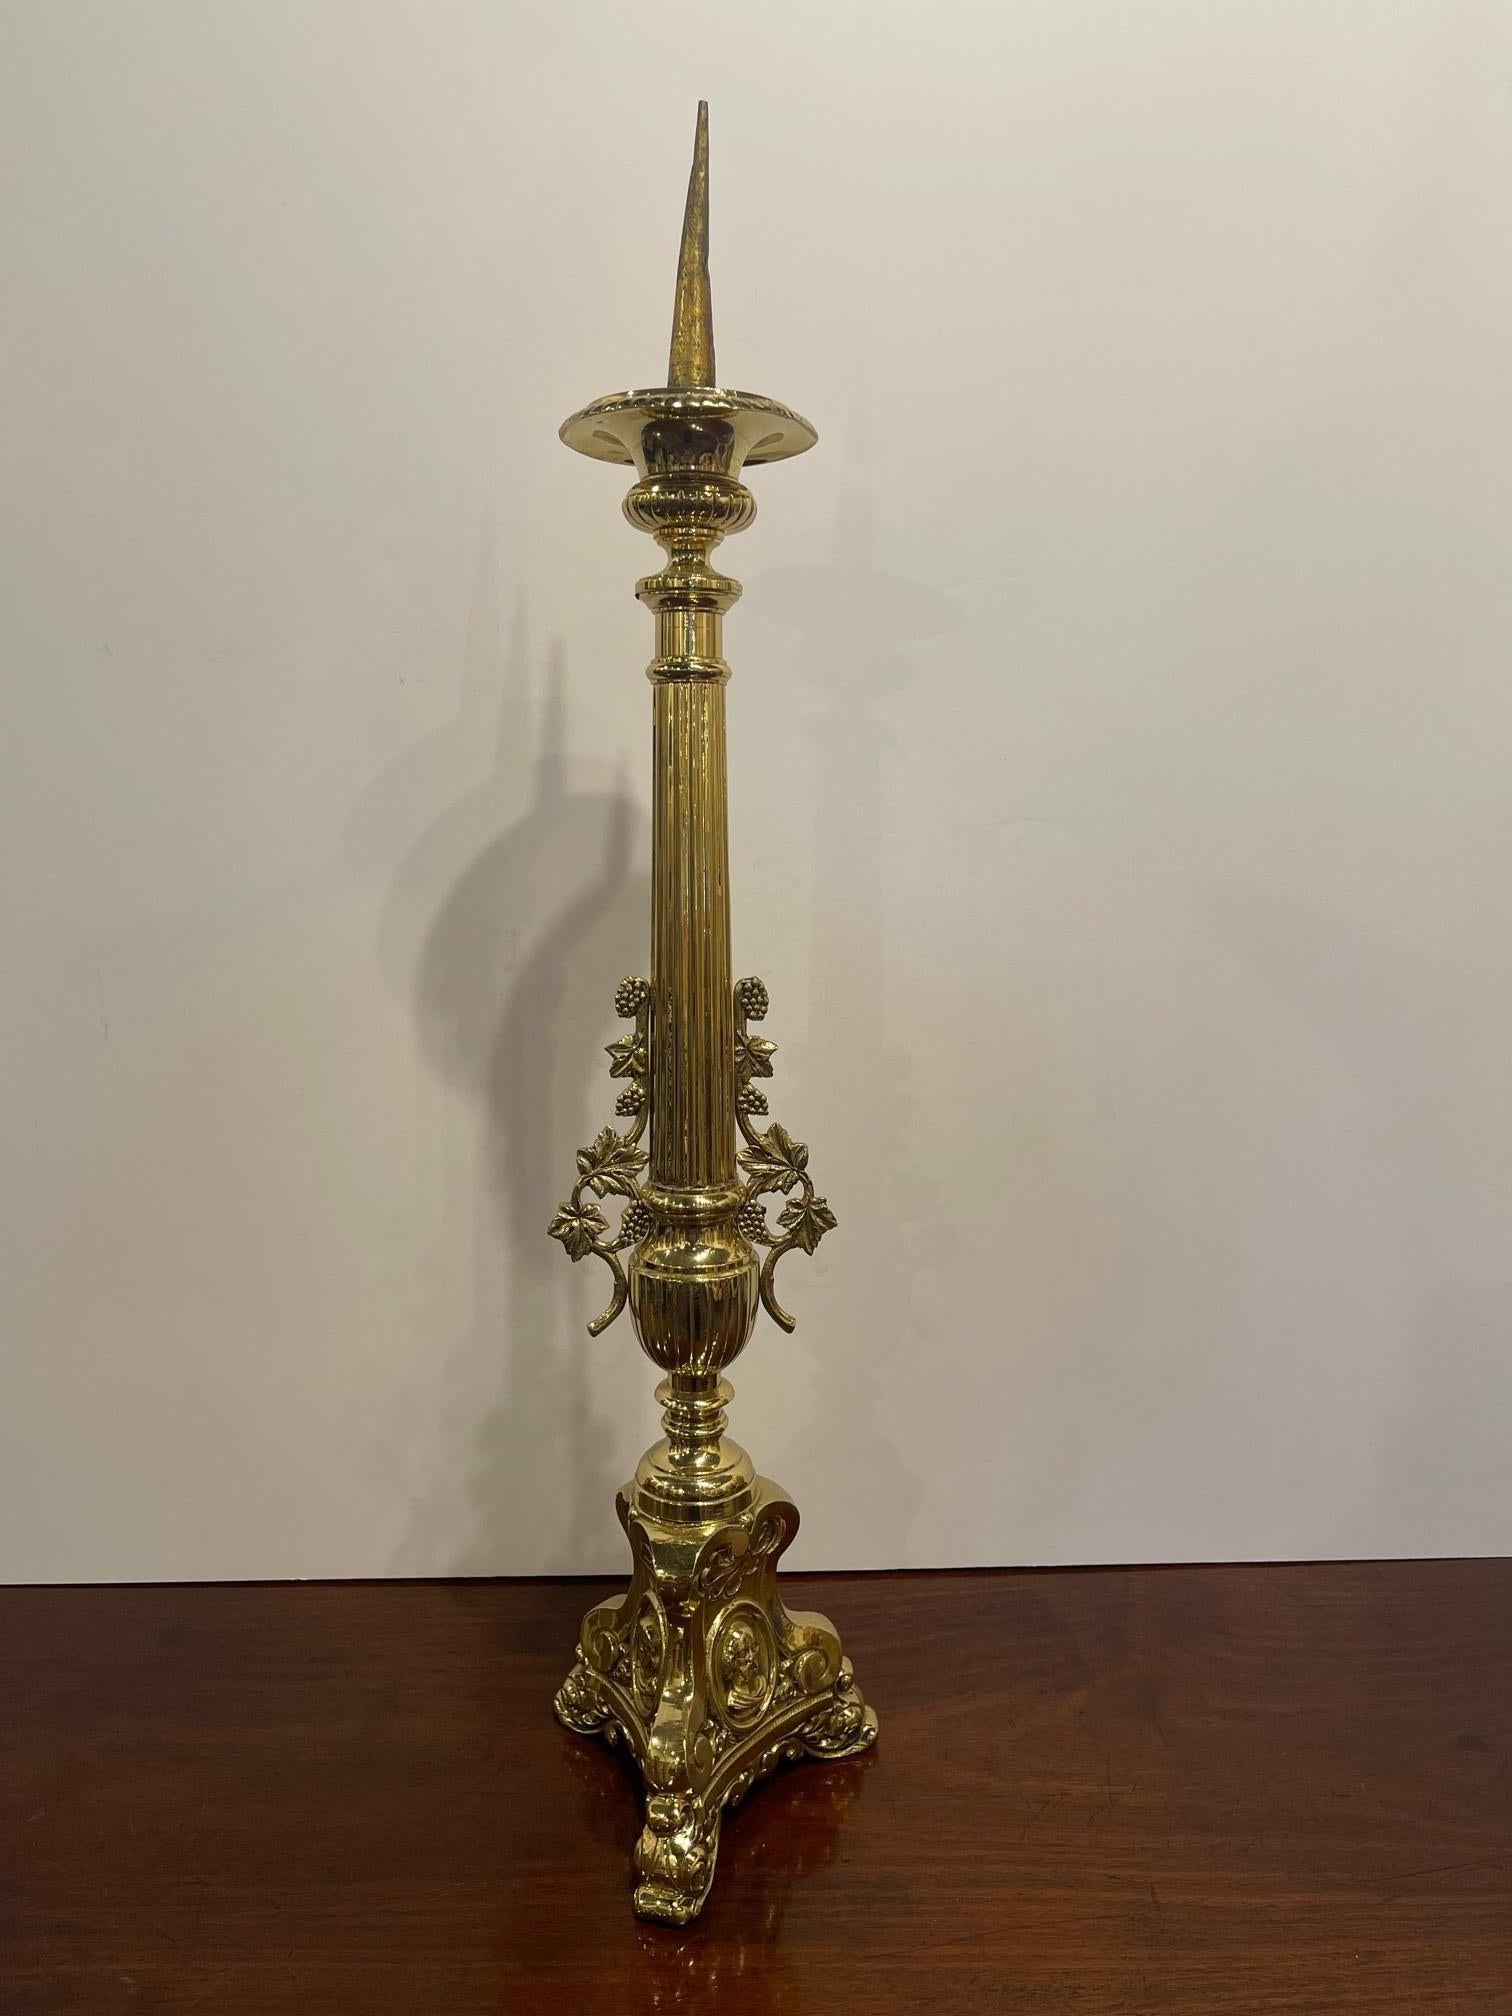 French polished brass decorative Pricket or candlestick, 19th century.